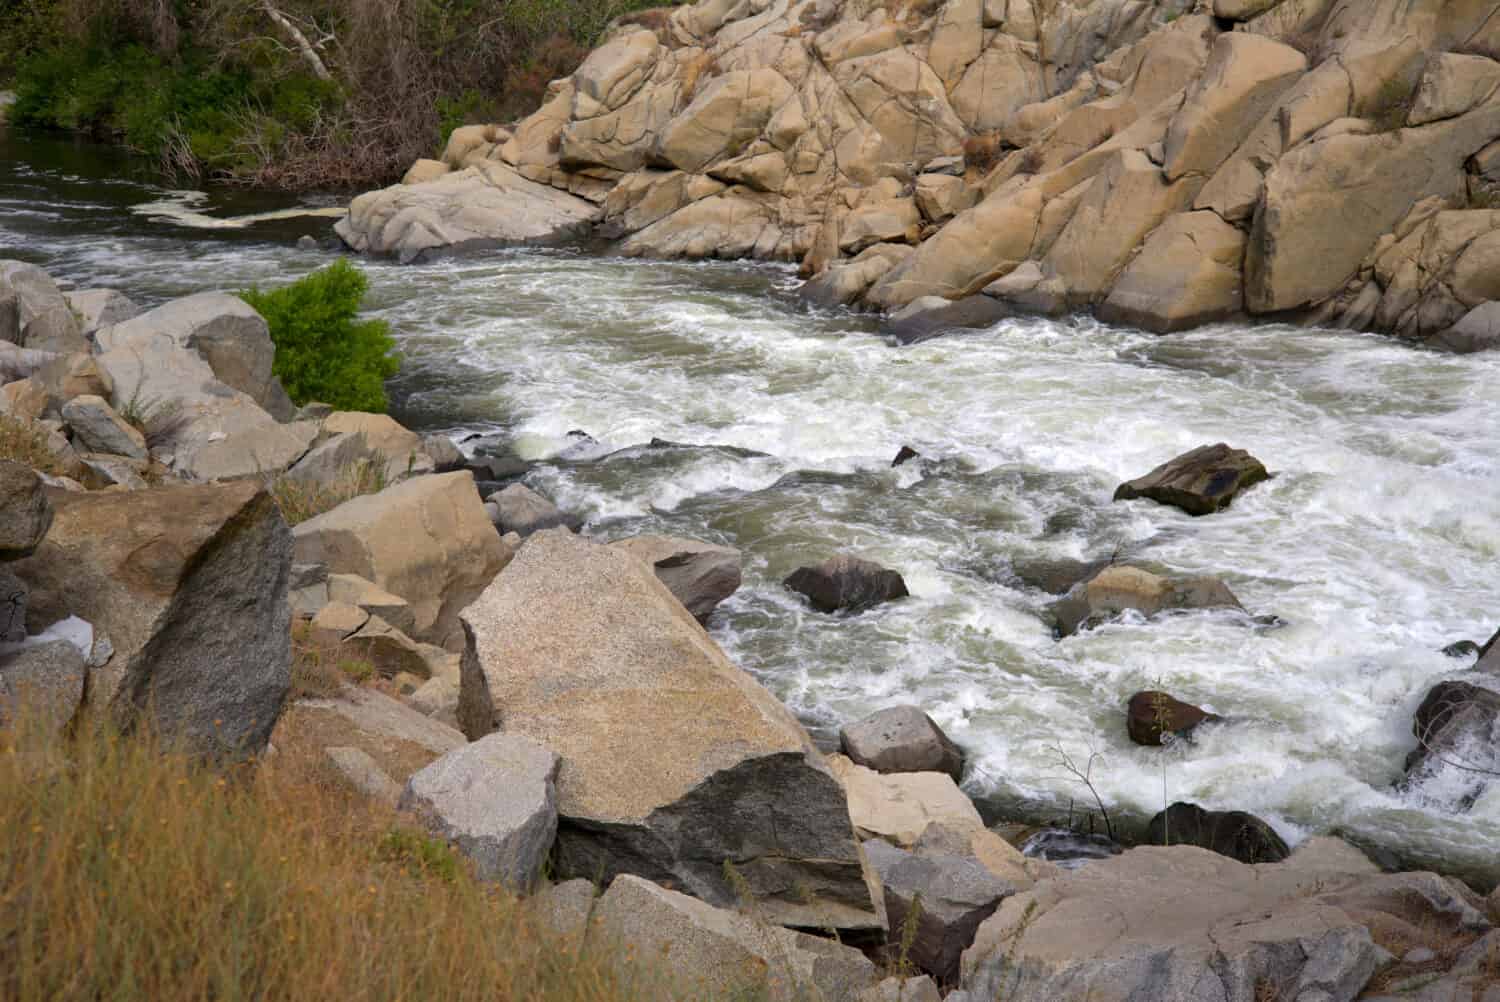 The Kern River, a tourist and recreational attraction, turns wild and treacherous at this point, a danger to swimmers and boaters alike.